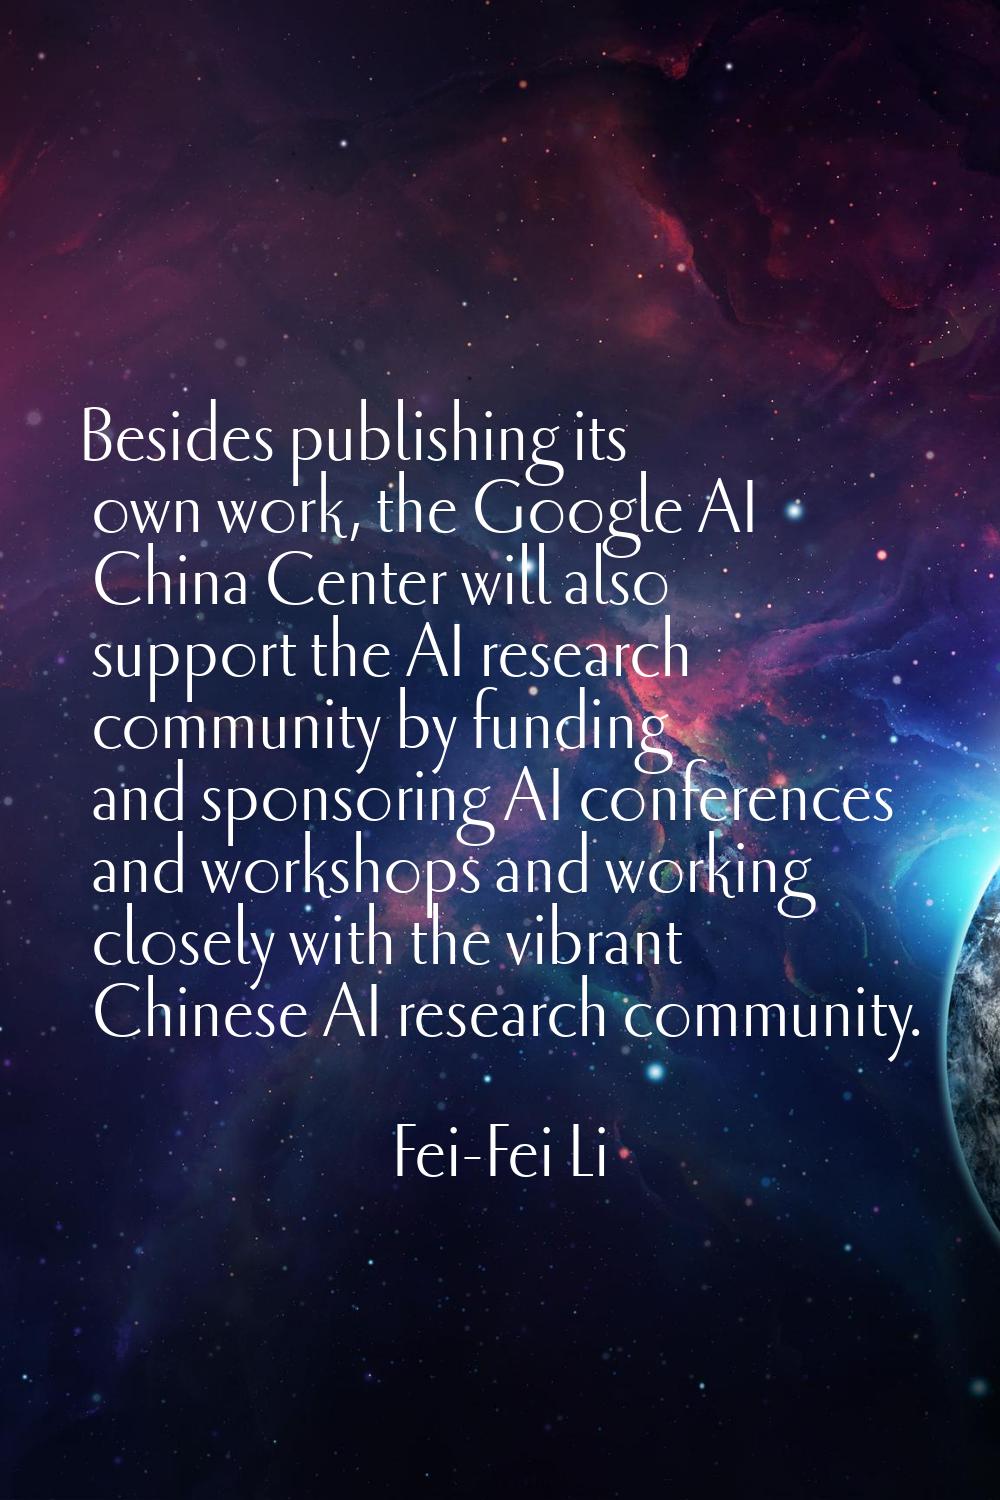 Besides publishing its own work, the Google AI China Center will also support the AI research commu